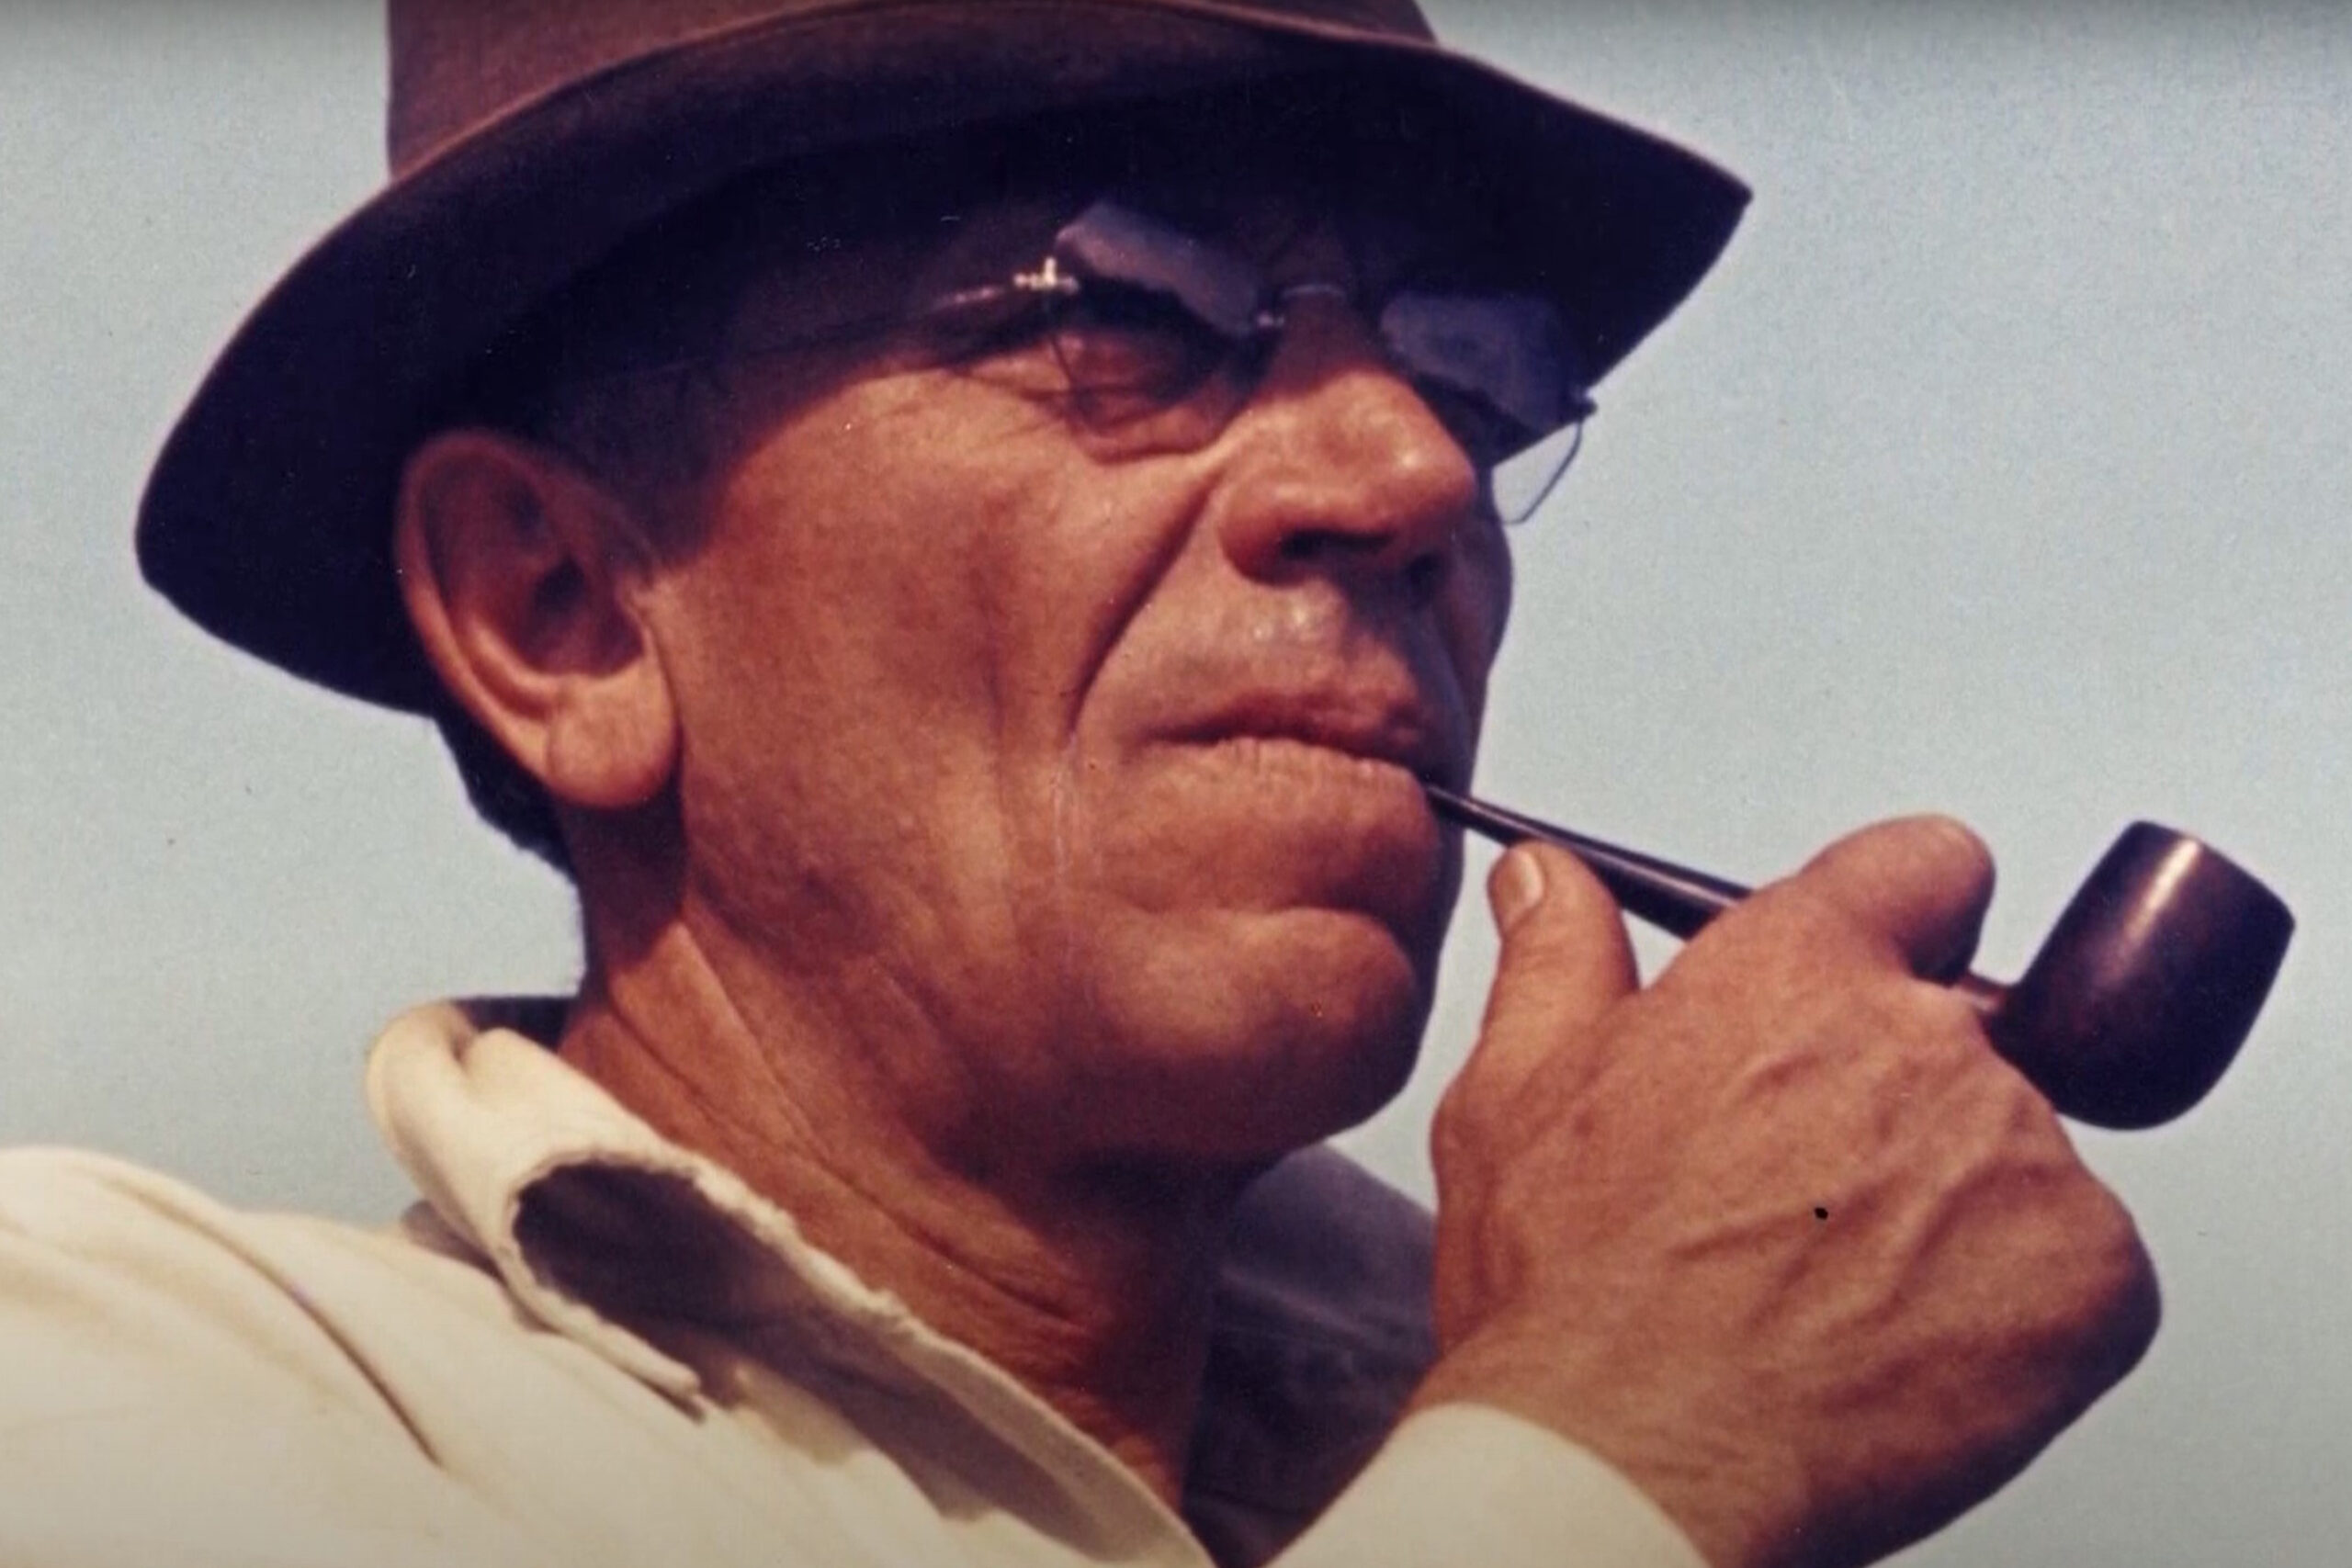 Watch Aldo Leopold’s Passion for Conservation Take Root in ‘Serve the Land’